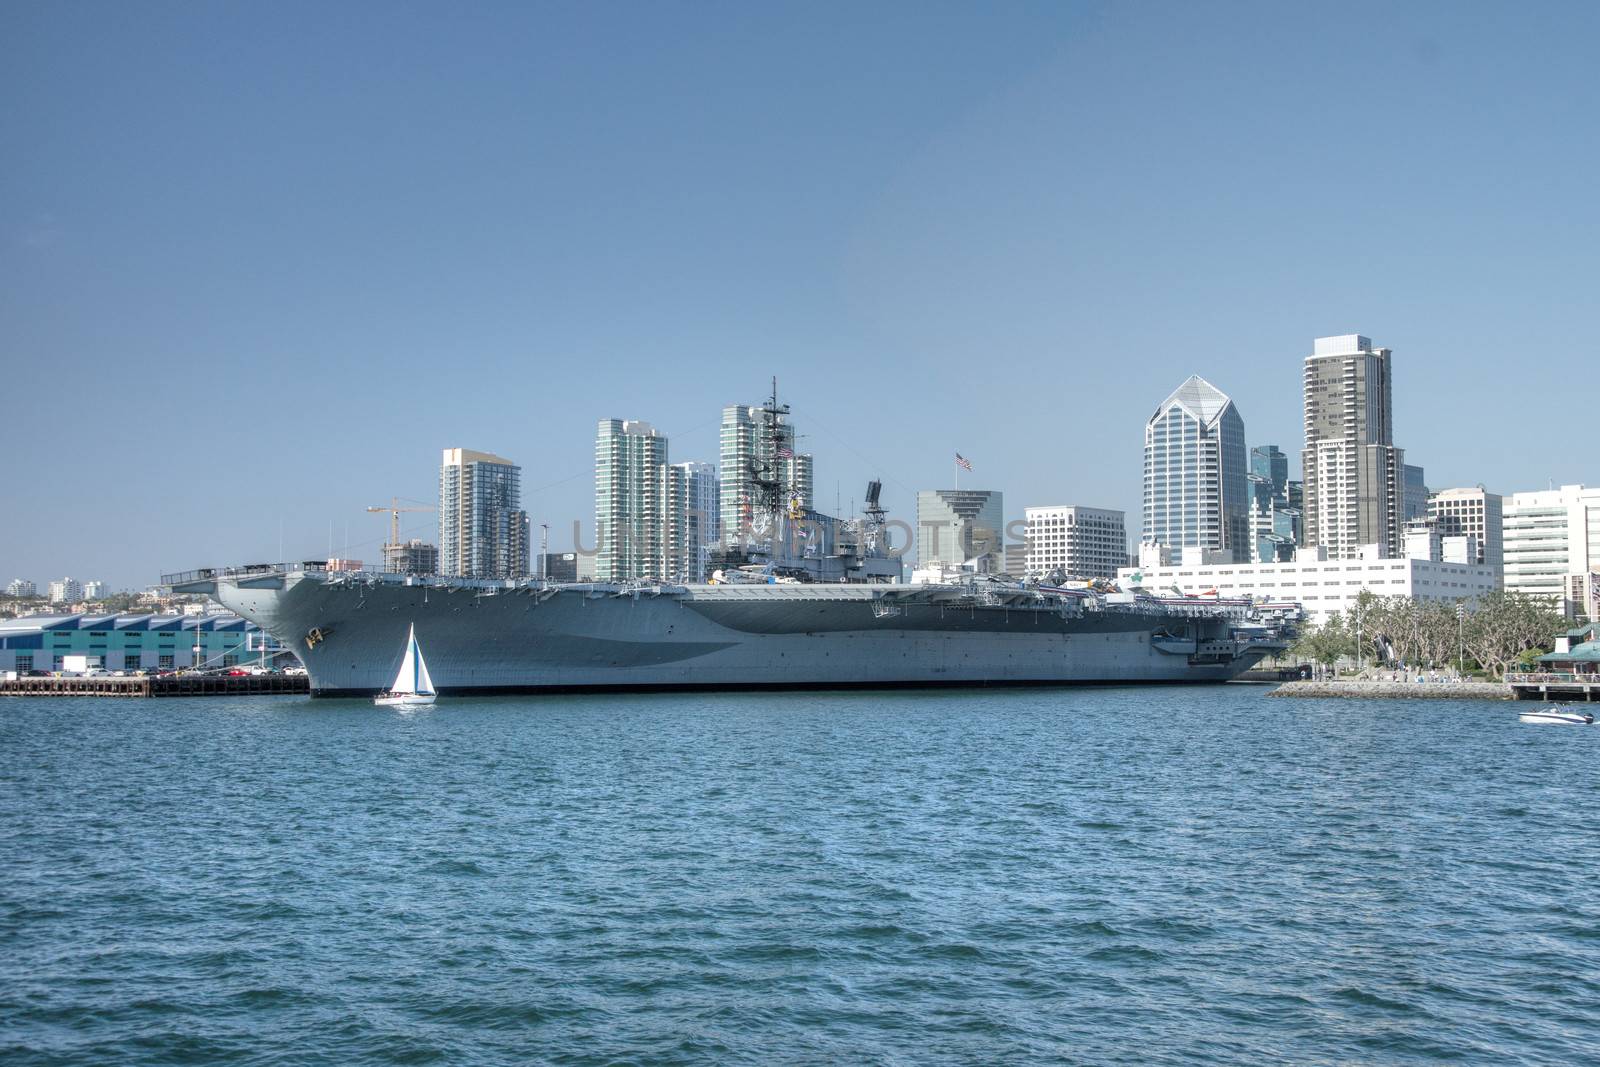 USS Midway by cvalle